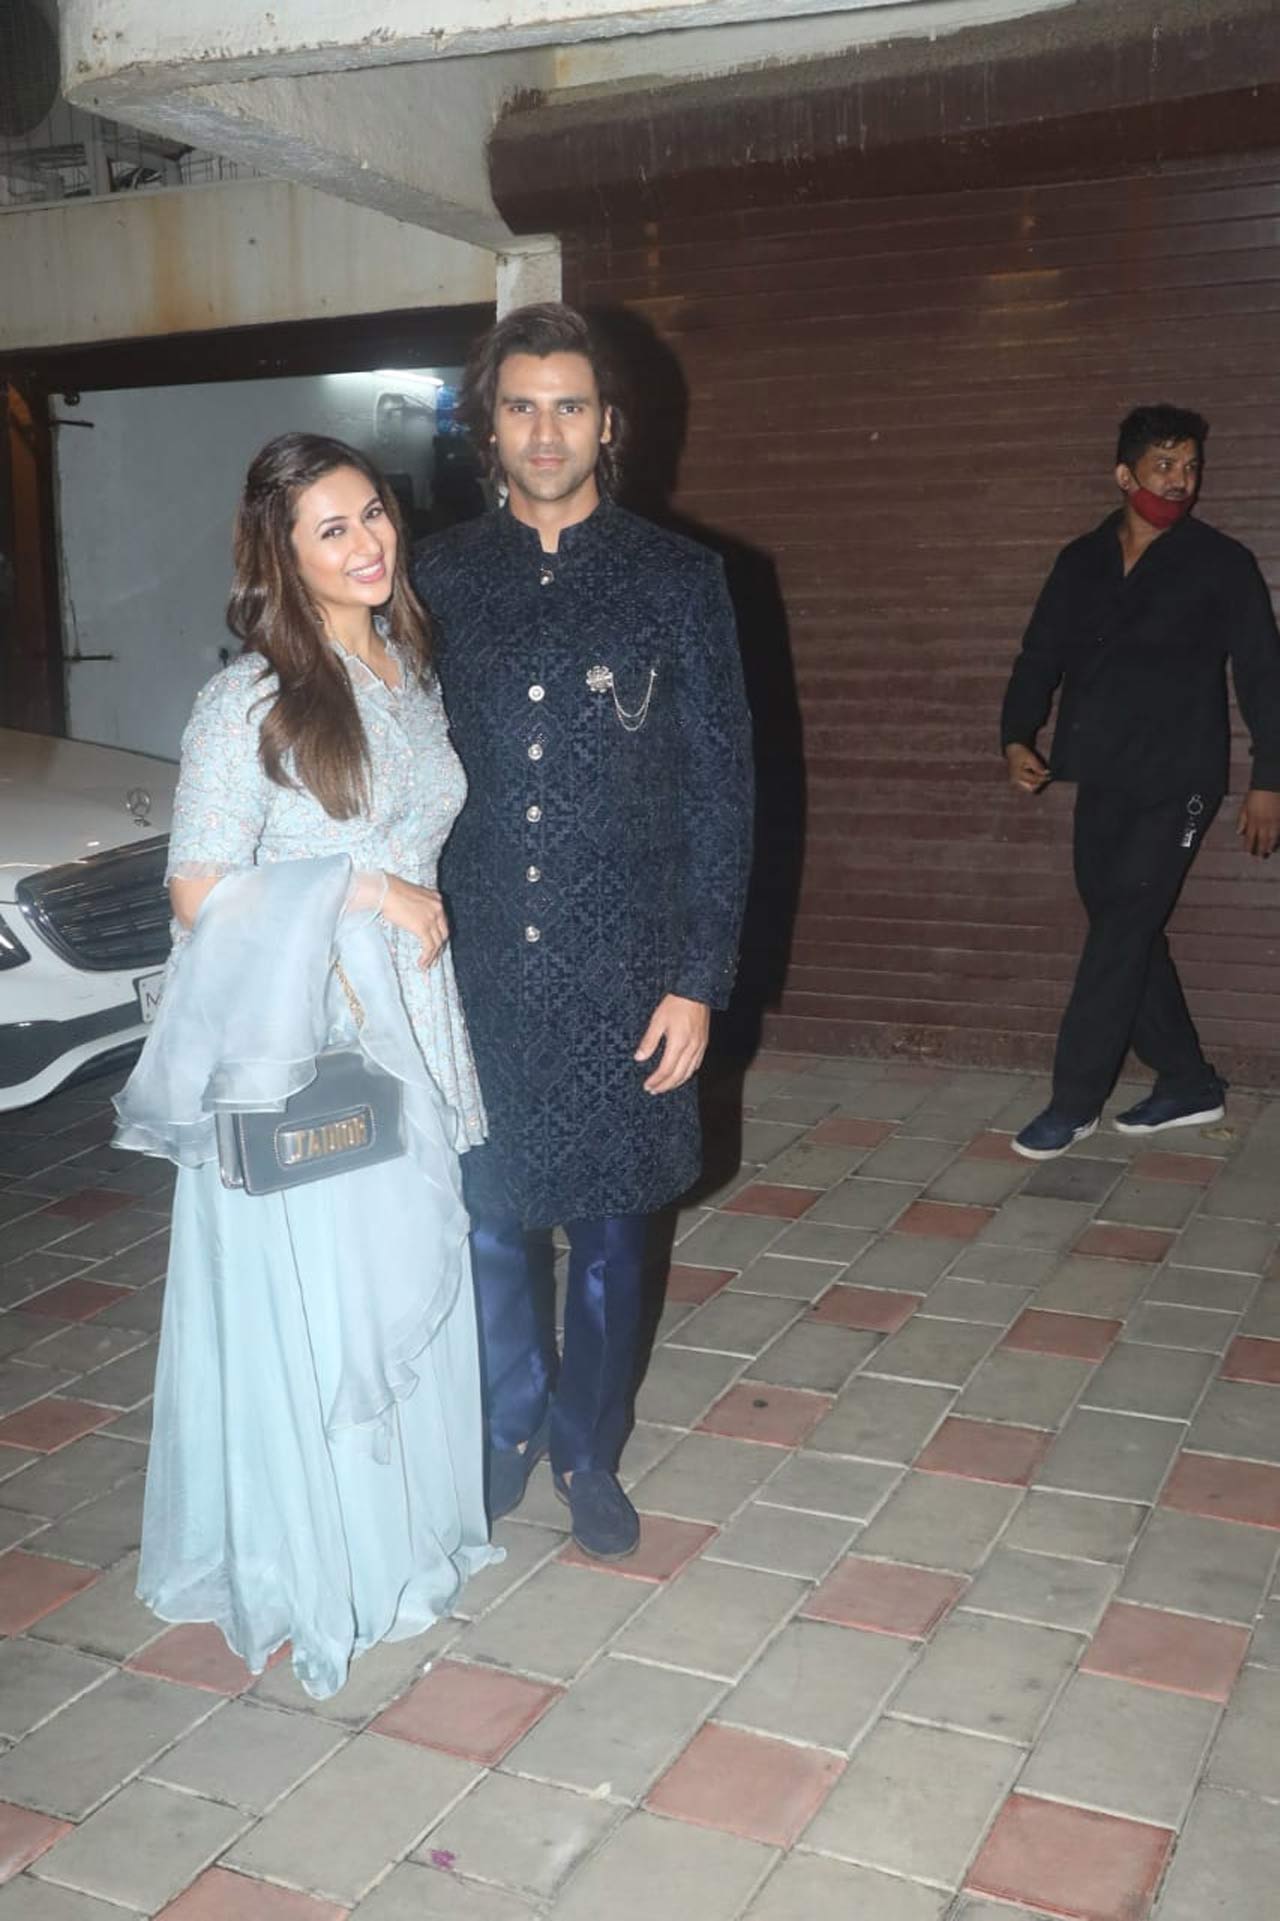 Divyanka Tripathi, along with her hubby Vivek Dahiya attended Sandiip Sickand's Diwali party hosted at his Juhu residence. The actress opted for a powder blue lehenga, whereas Vivek was snapped wearing a navy blue sherwani.